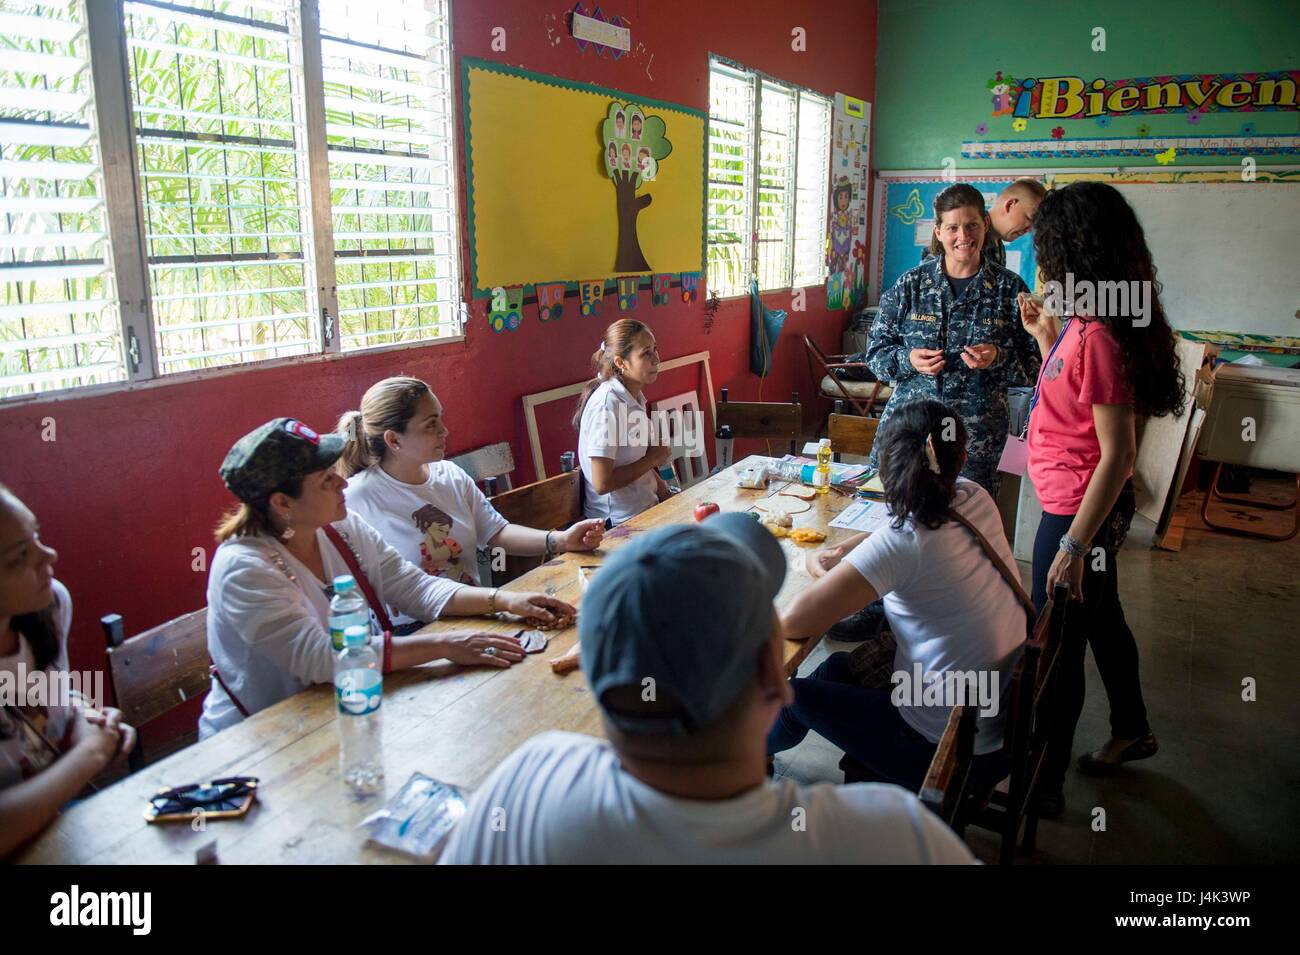 170225-N-YL073-638 TRUJILLO, Honduras (Feb. 27, 2017) – Cmdr. Jennifer Wallinger, a dietitian and native of Carmel, N.Y., assigned to Naval Hospital Jacksonville, Fla., conducts a basic nutrition class for host nation residents at the Continuing Promise 2017 (CP-17) medical site in support of CP-17's visit to Trujillo, Honduras. CP-17 is a U.S. Southern Command-sponsored and U.S. Naval Forces Southern Command/U.S. 4th Fleet-conducted deployment to conduct civil-military operations including humanitarian assistance, training engagements, and medical, dental, and veterinary support in an effort  Stock Photo